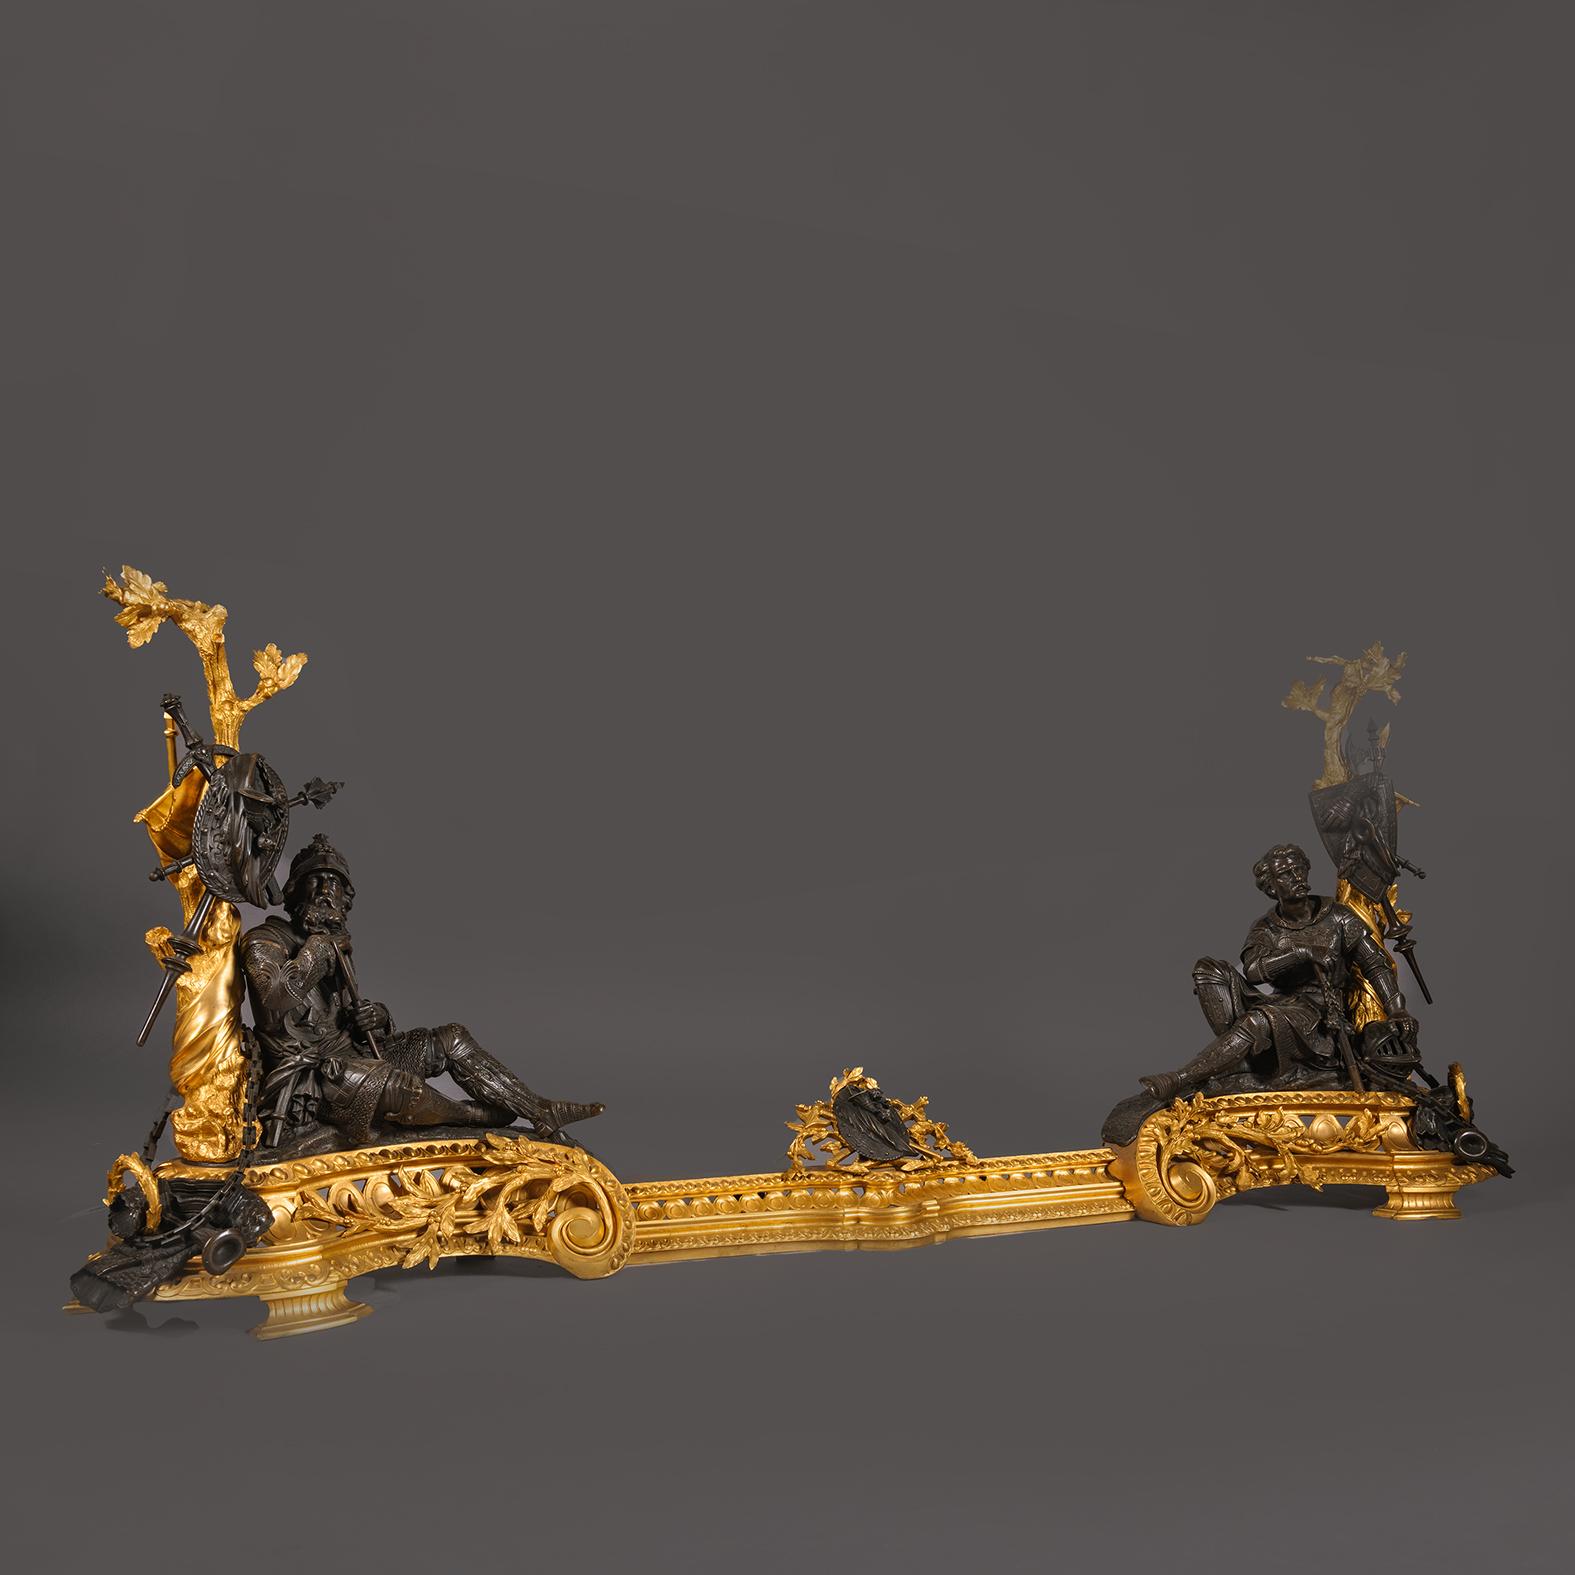 A Fine Napoleon III Period Gilt and Patinated Bronze Figural Chenet and Fender. 

Finely cast and chiselled in gilt and patinated bronze this impressive fender is in the form of scrolling foliate chenets with seated soldiers reclining against trees,